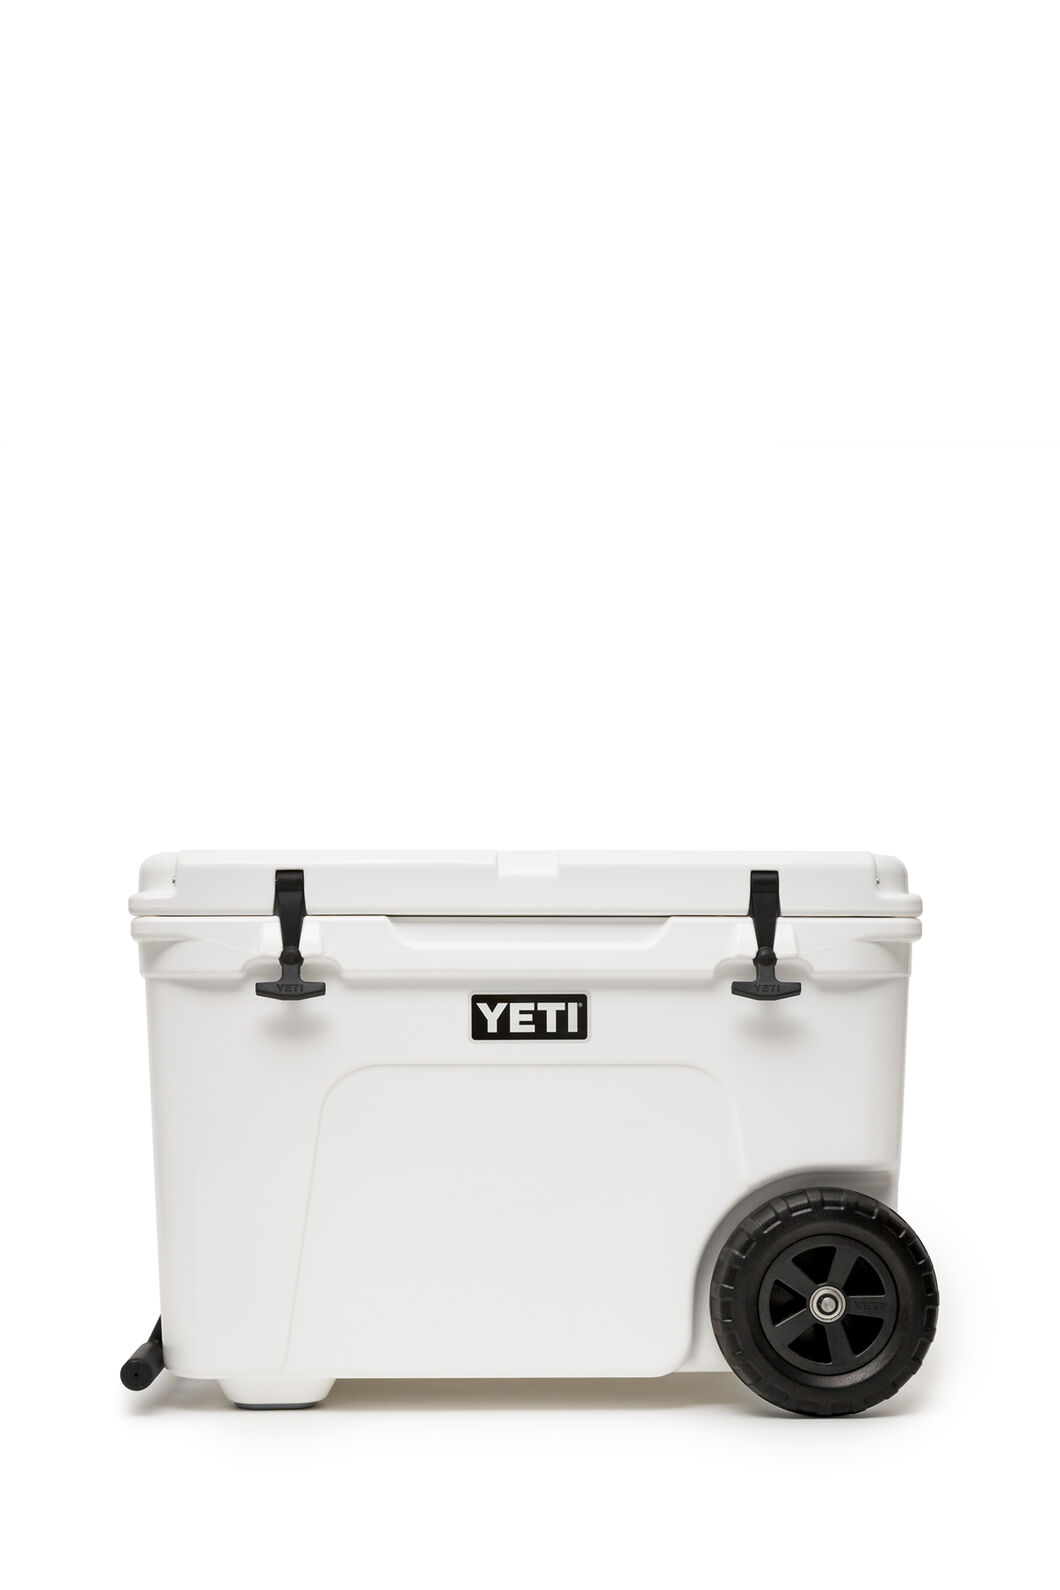 YETI Tundra Haul Cooler Review: Tough and Efficient